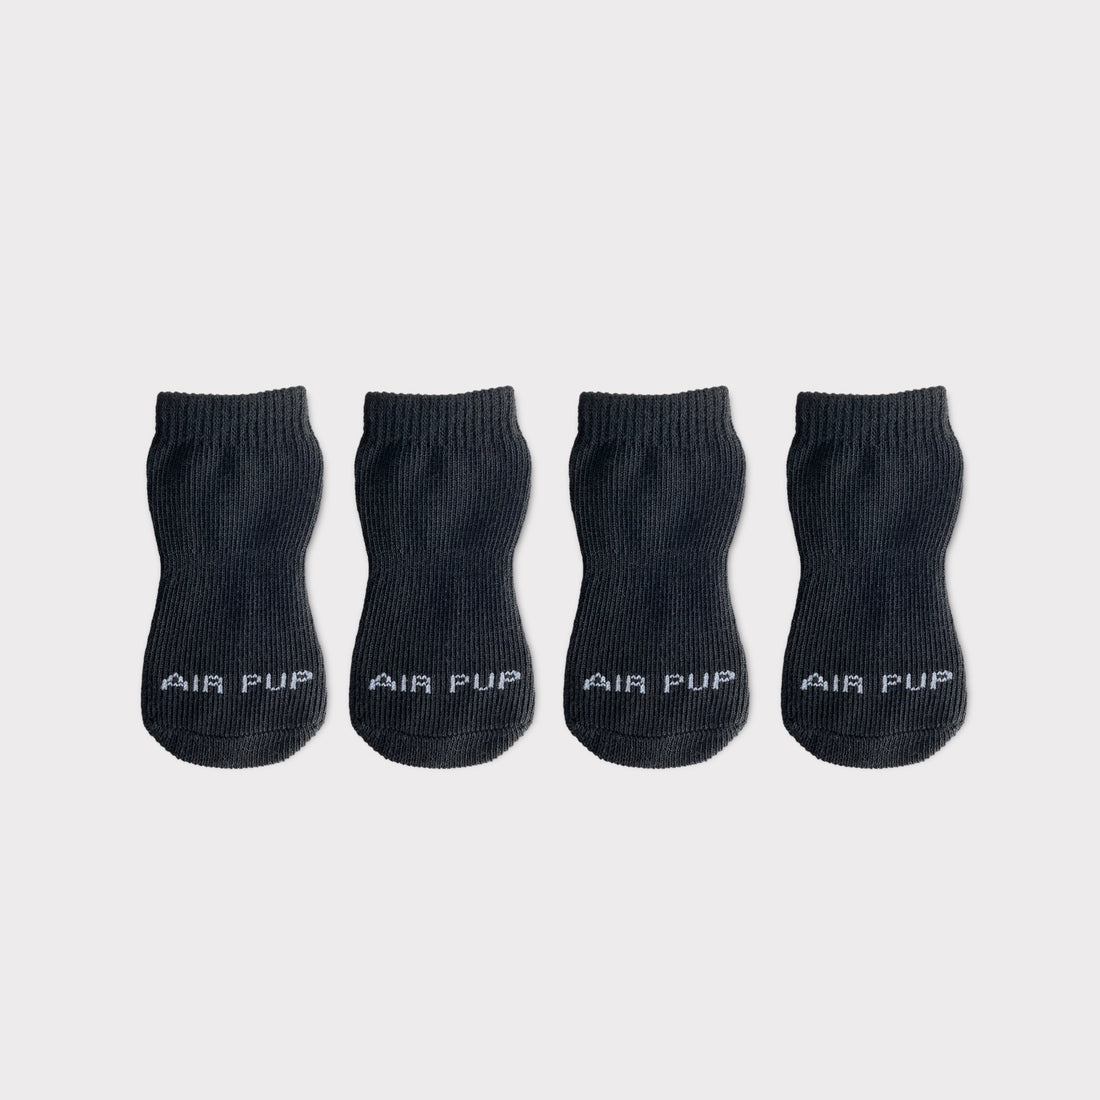 Air Pup socks. Sold in a set of 4.